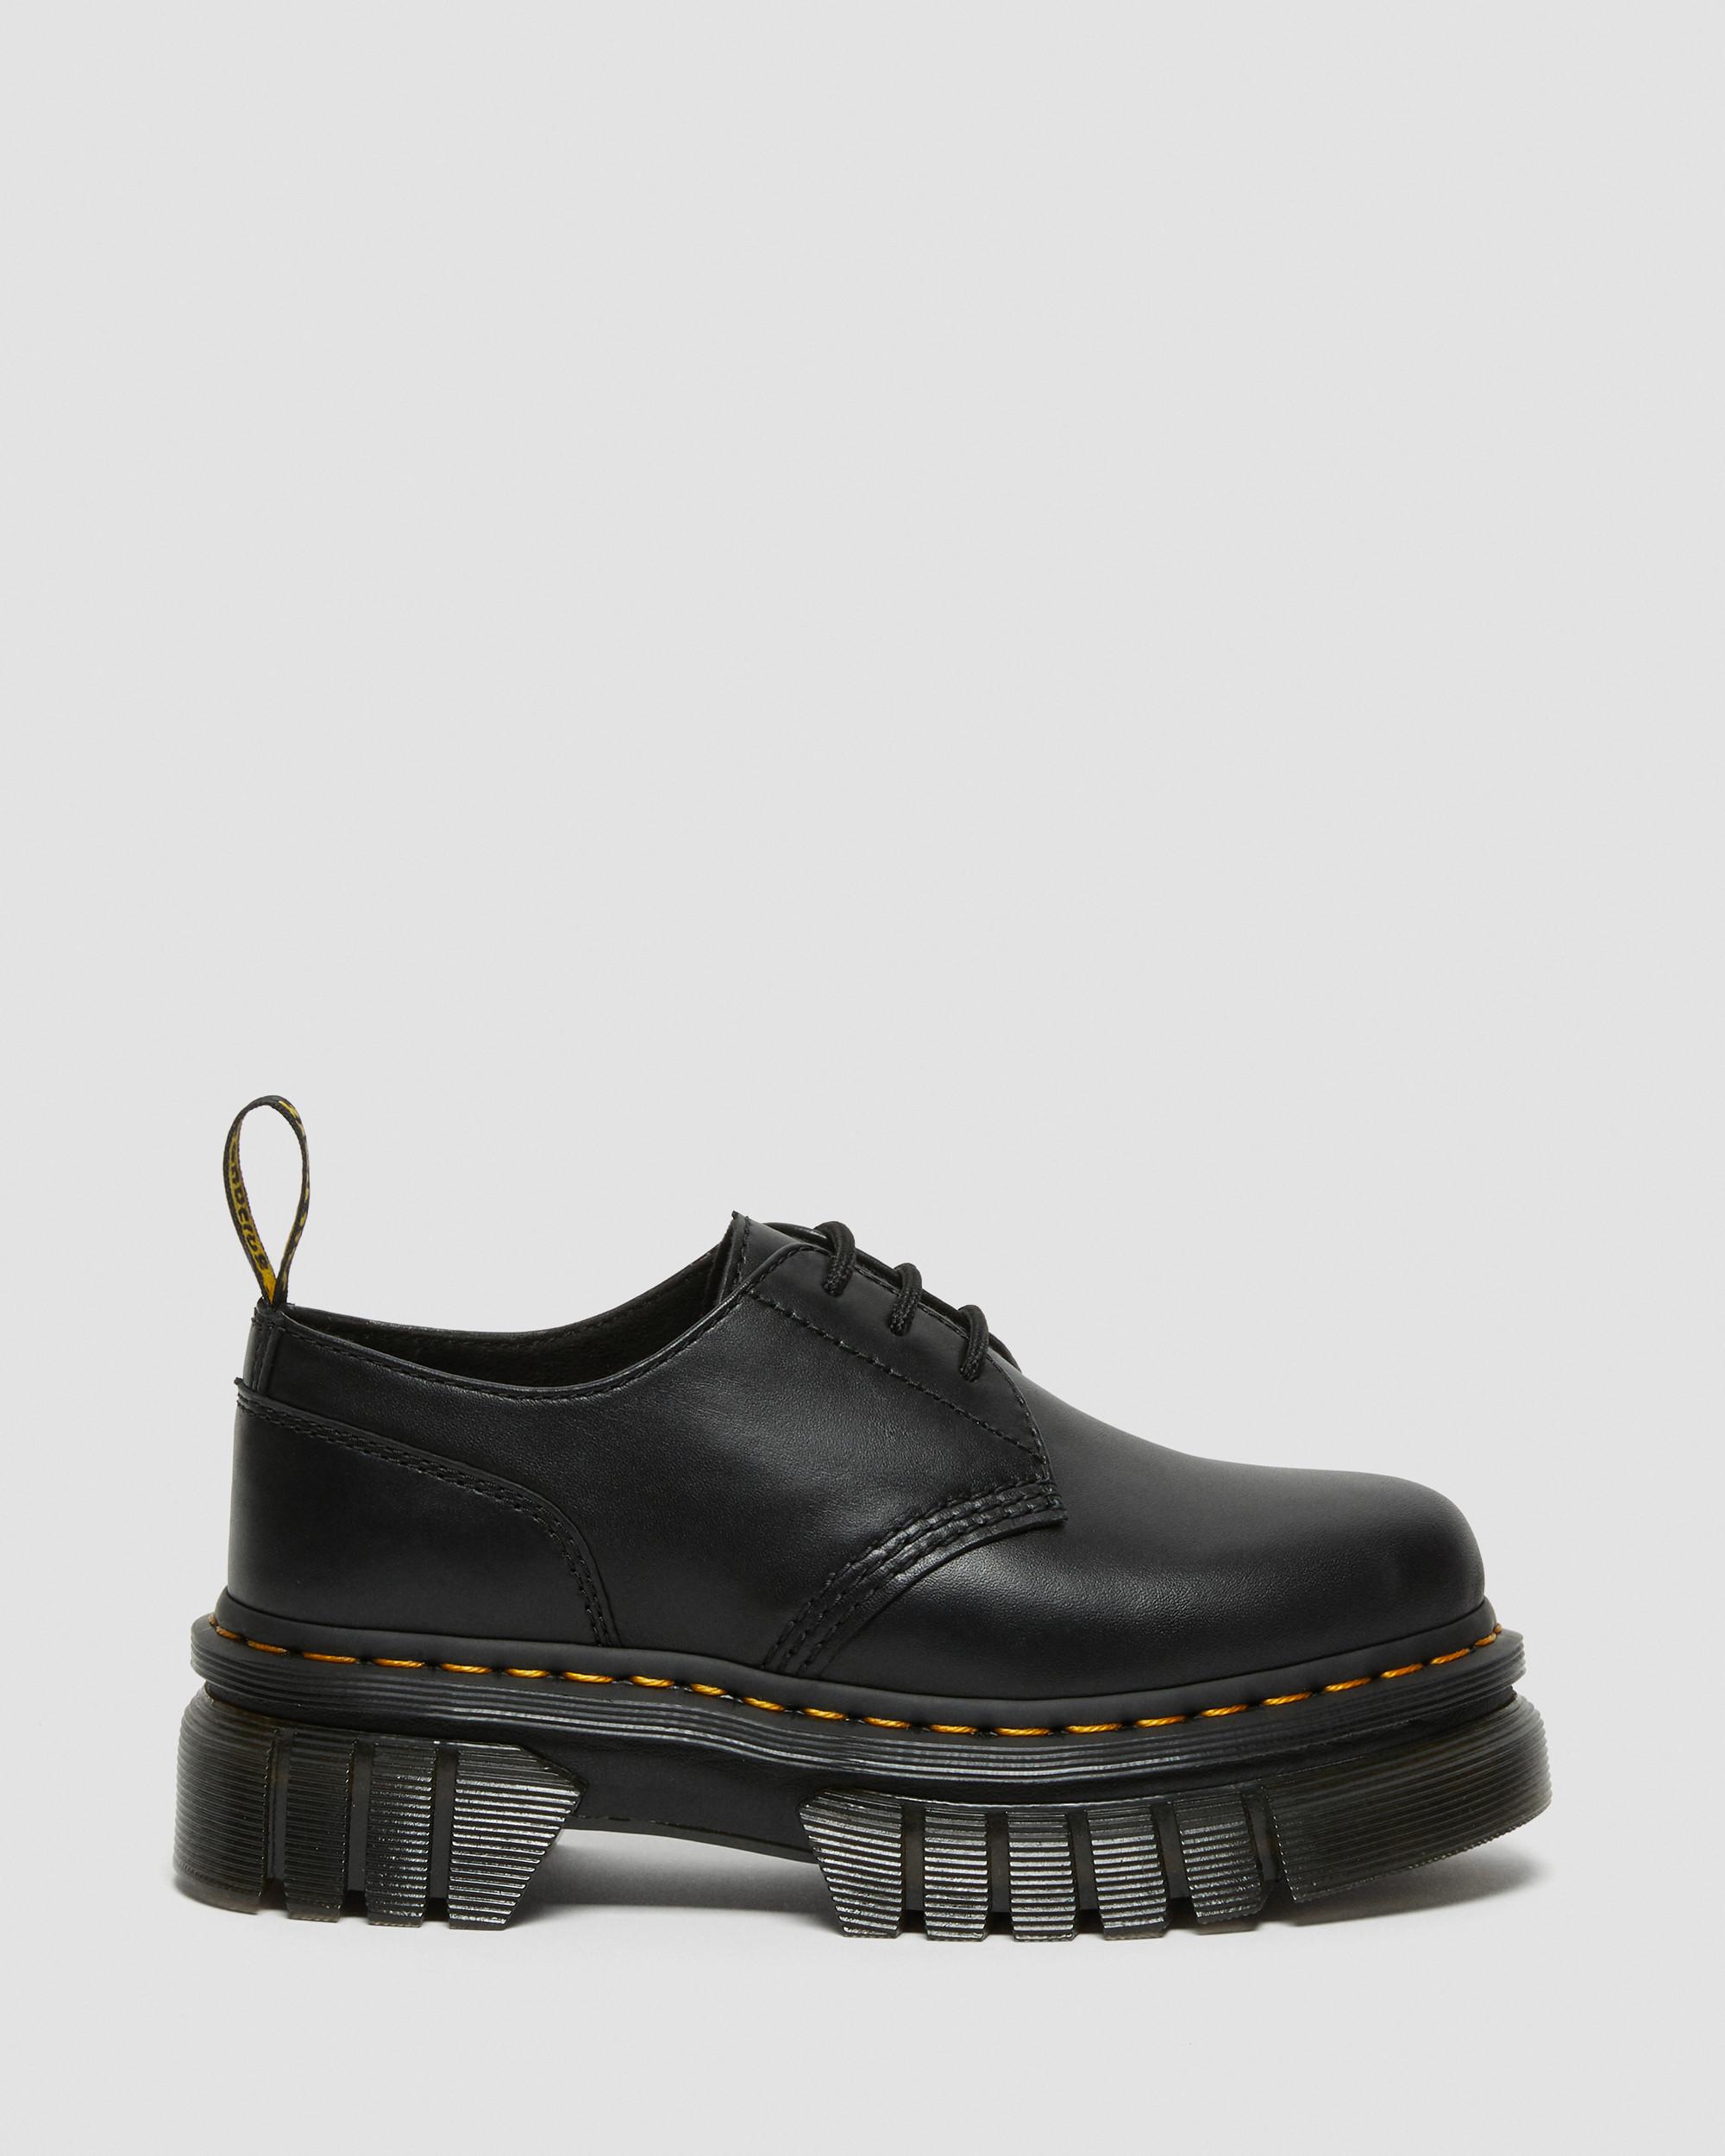 Audrick 3-Eye Shoe Nappa Lux Leather Shoes